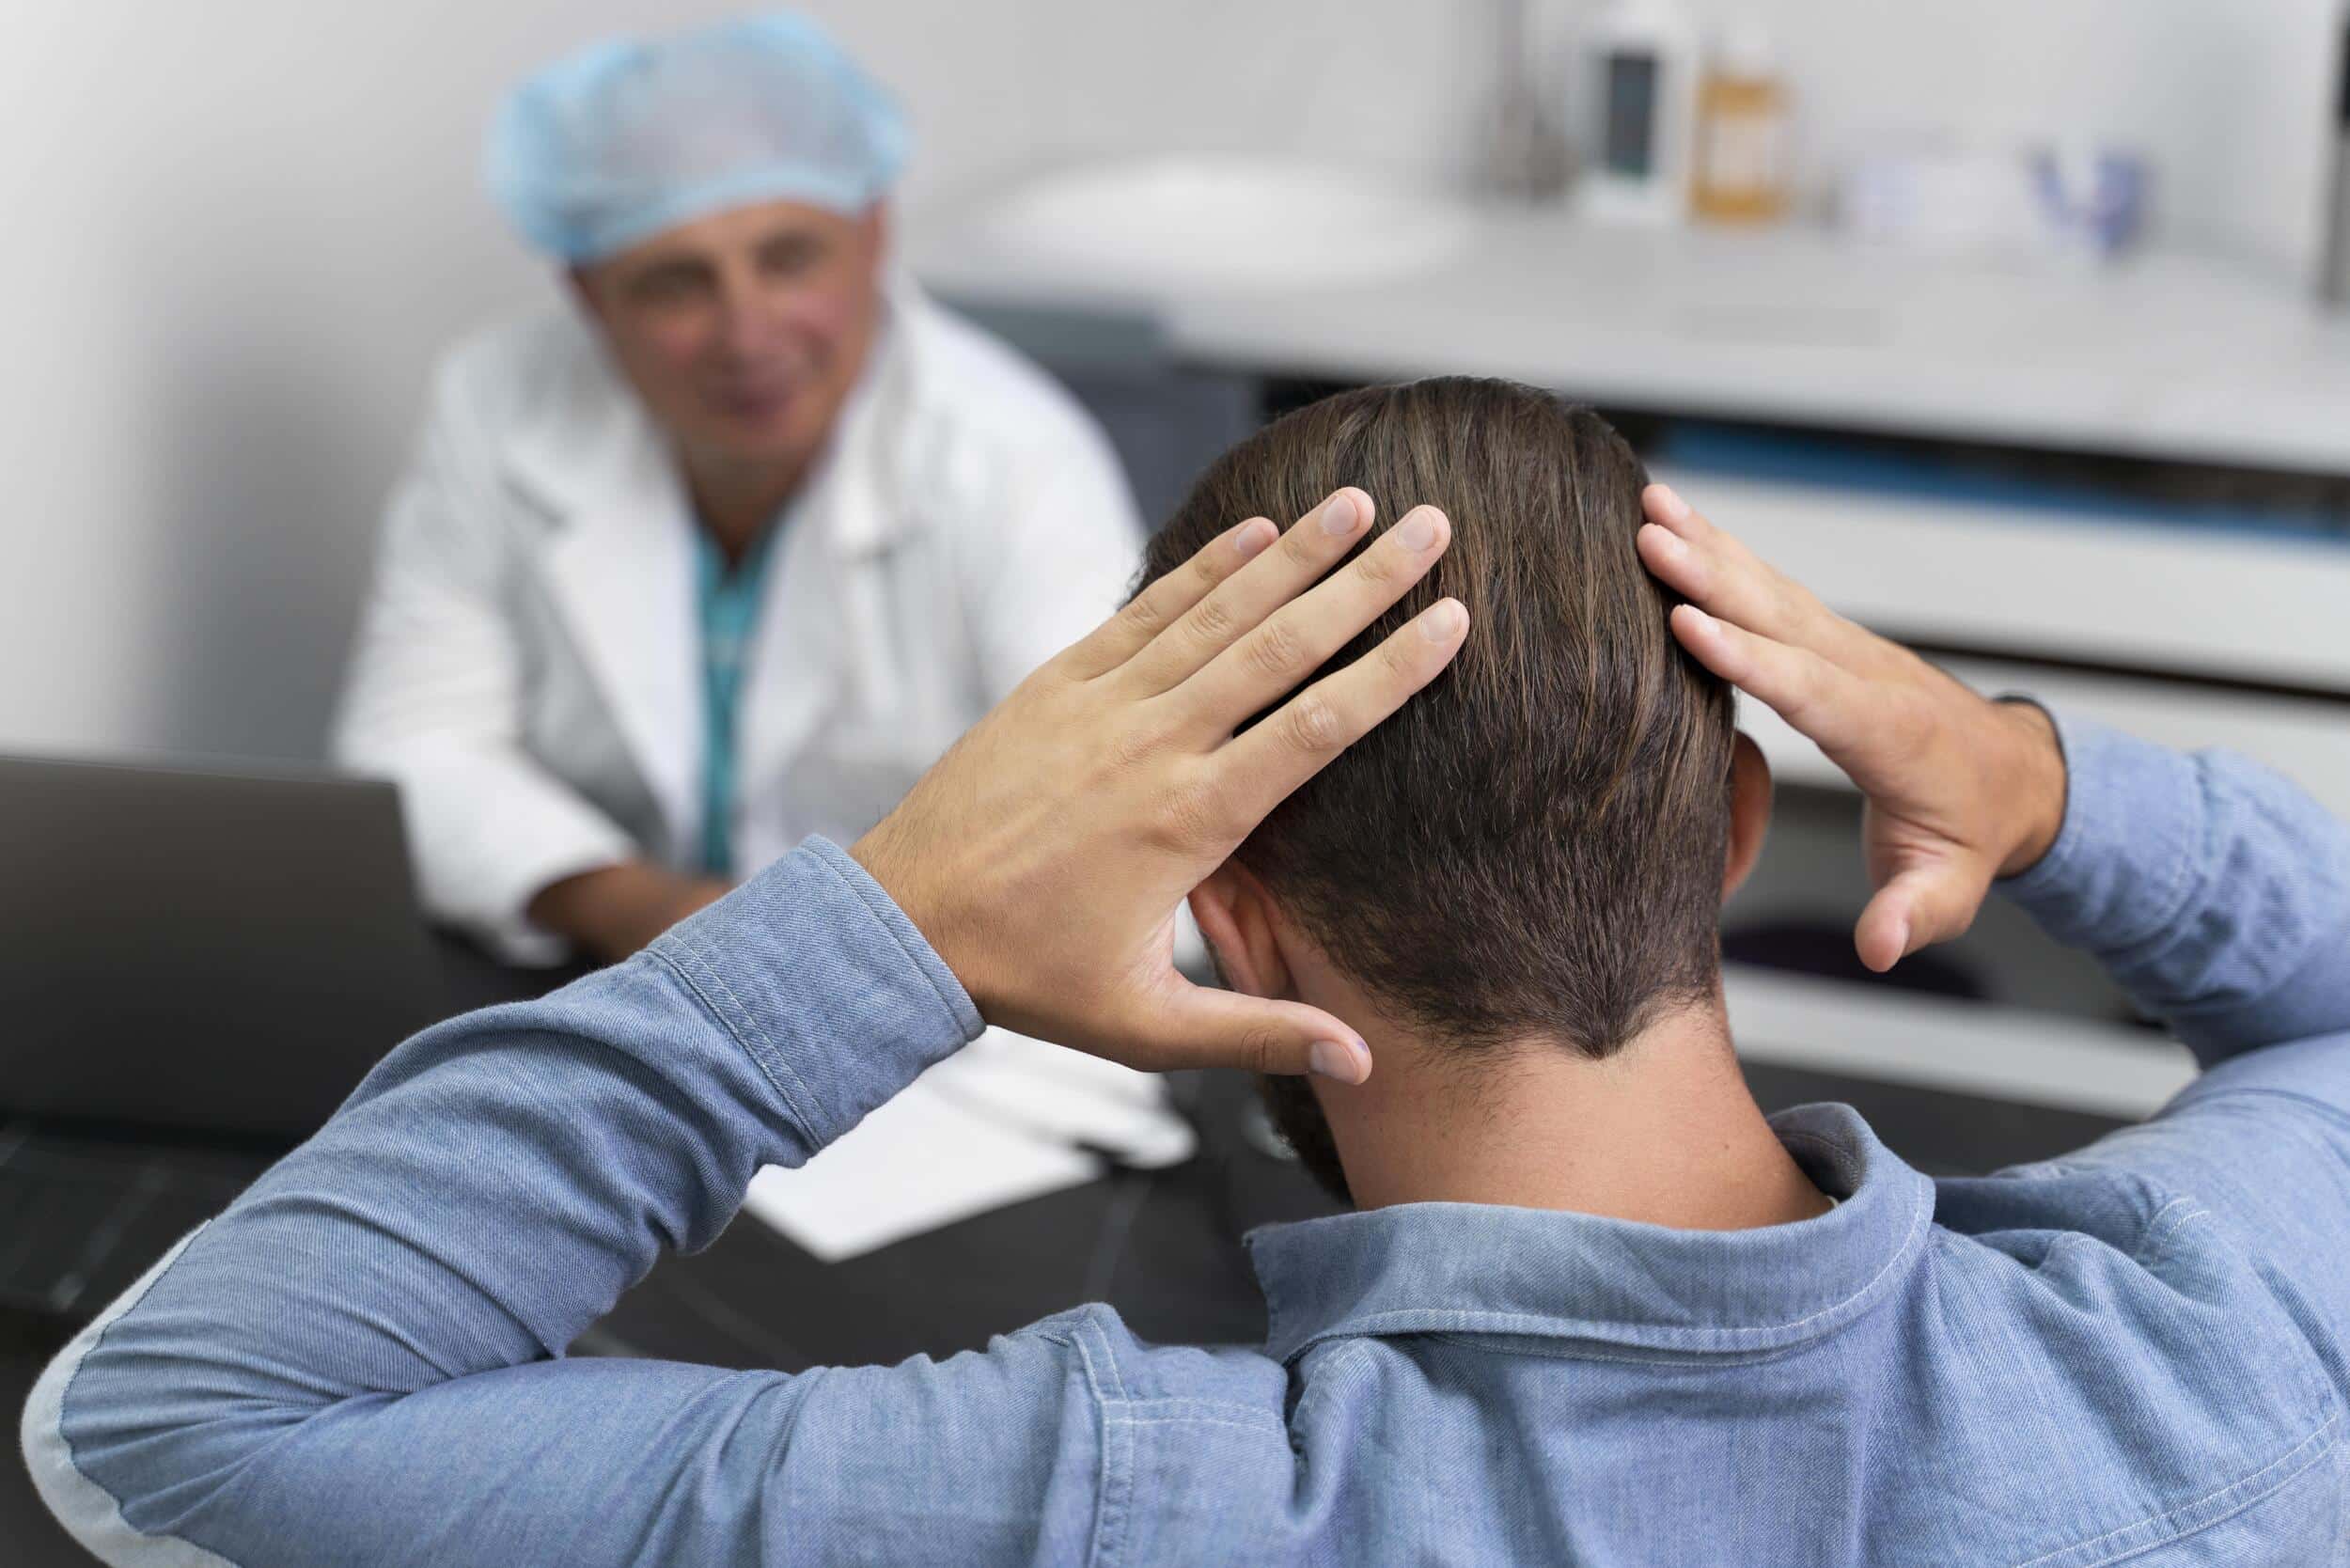 How To Proceed With A Hair Transplant If You Have A Weak Donor Area?